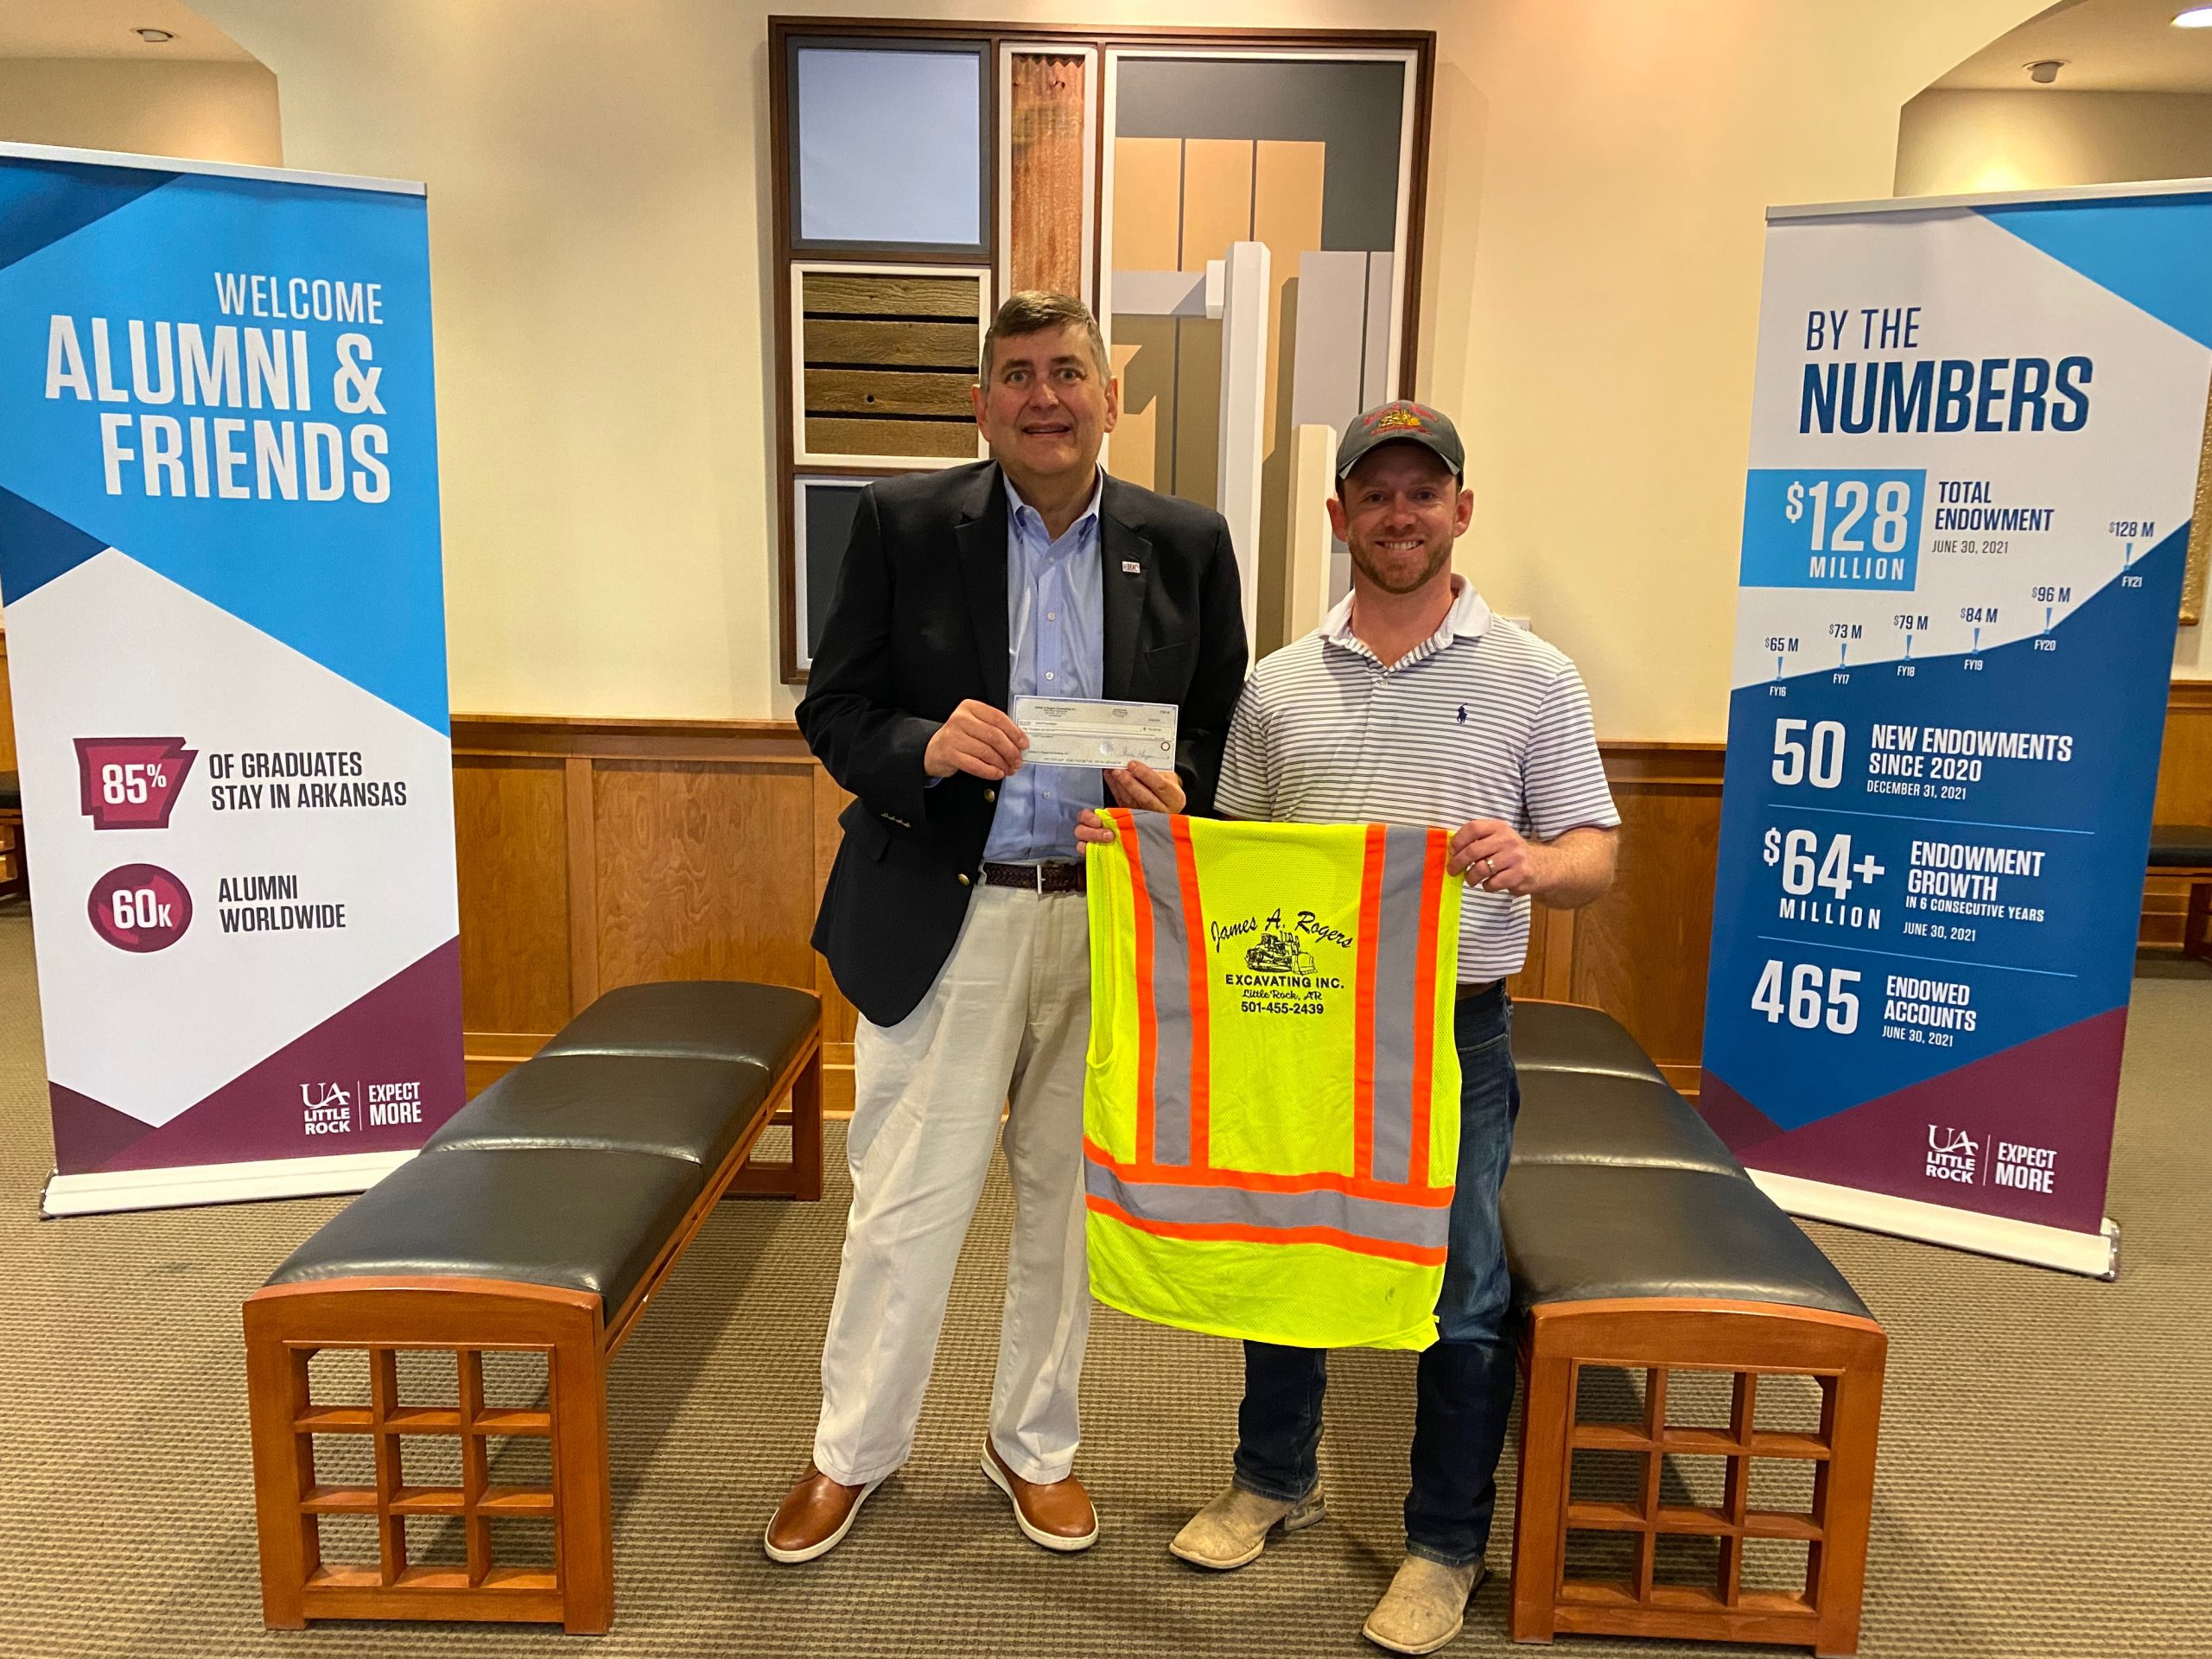 Lloyd Webre, director of development and external affairs at UA Little Rock, thanks Chris Meyer for his donation to sponsor a soils lab at UA Little Rock.